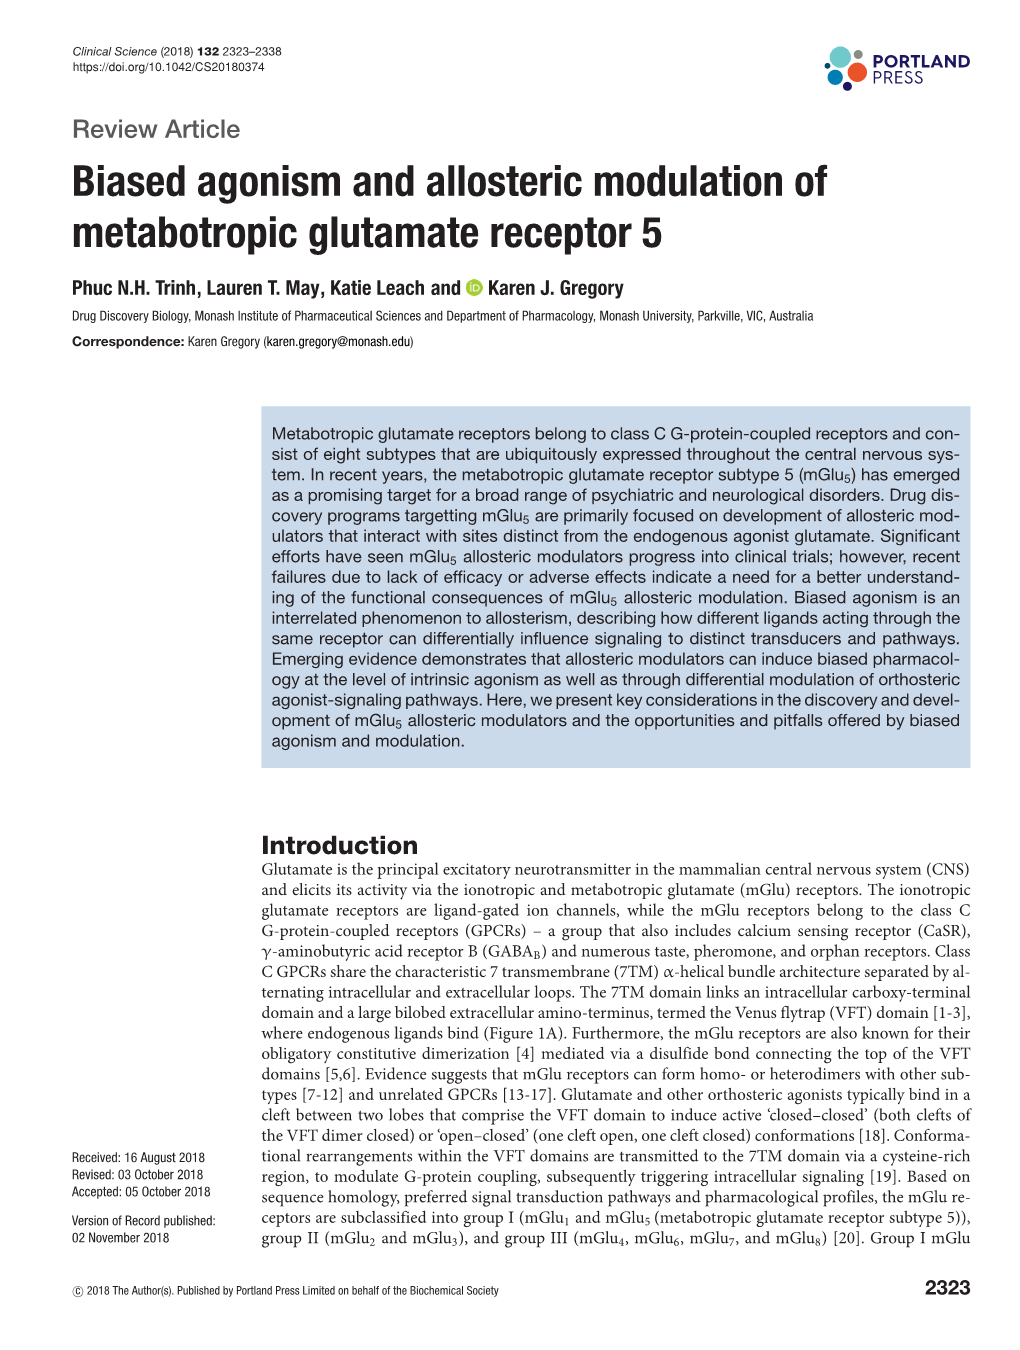 Biased Agonism and Allosteric Modulation of Metabotropic Glutamate Receptor 5